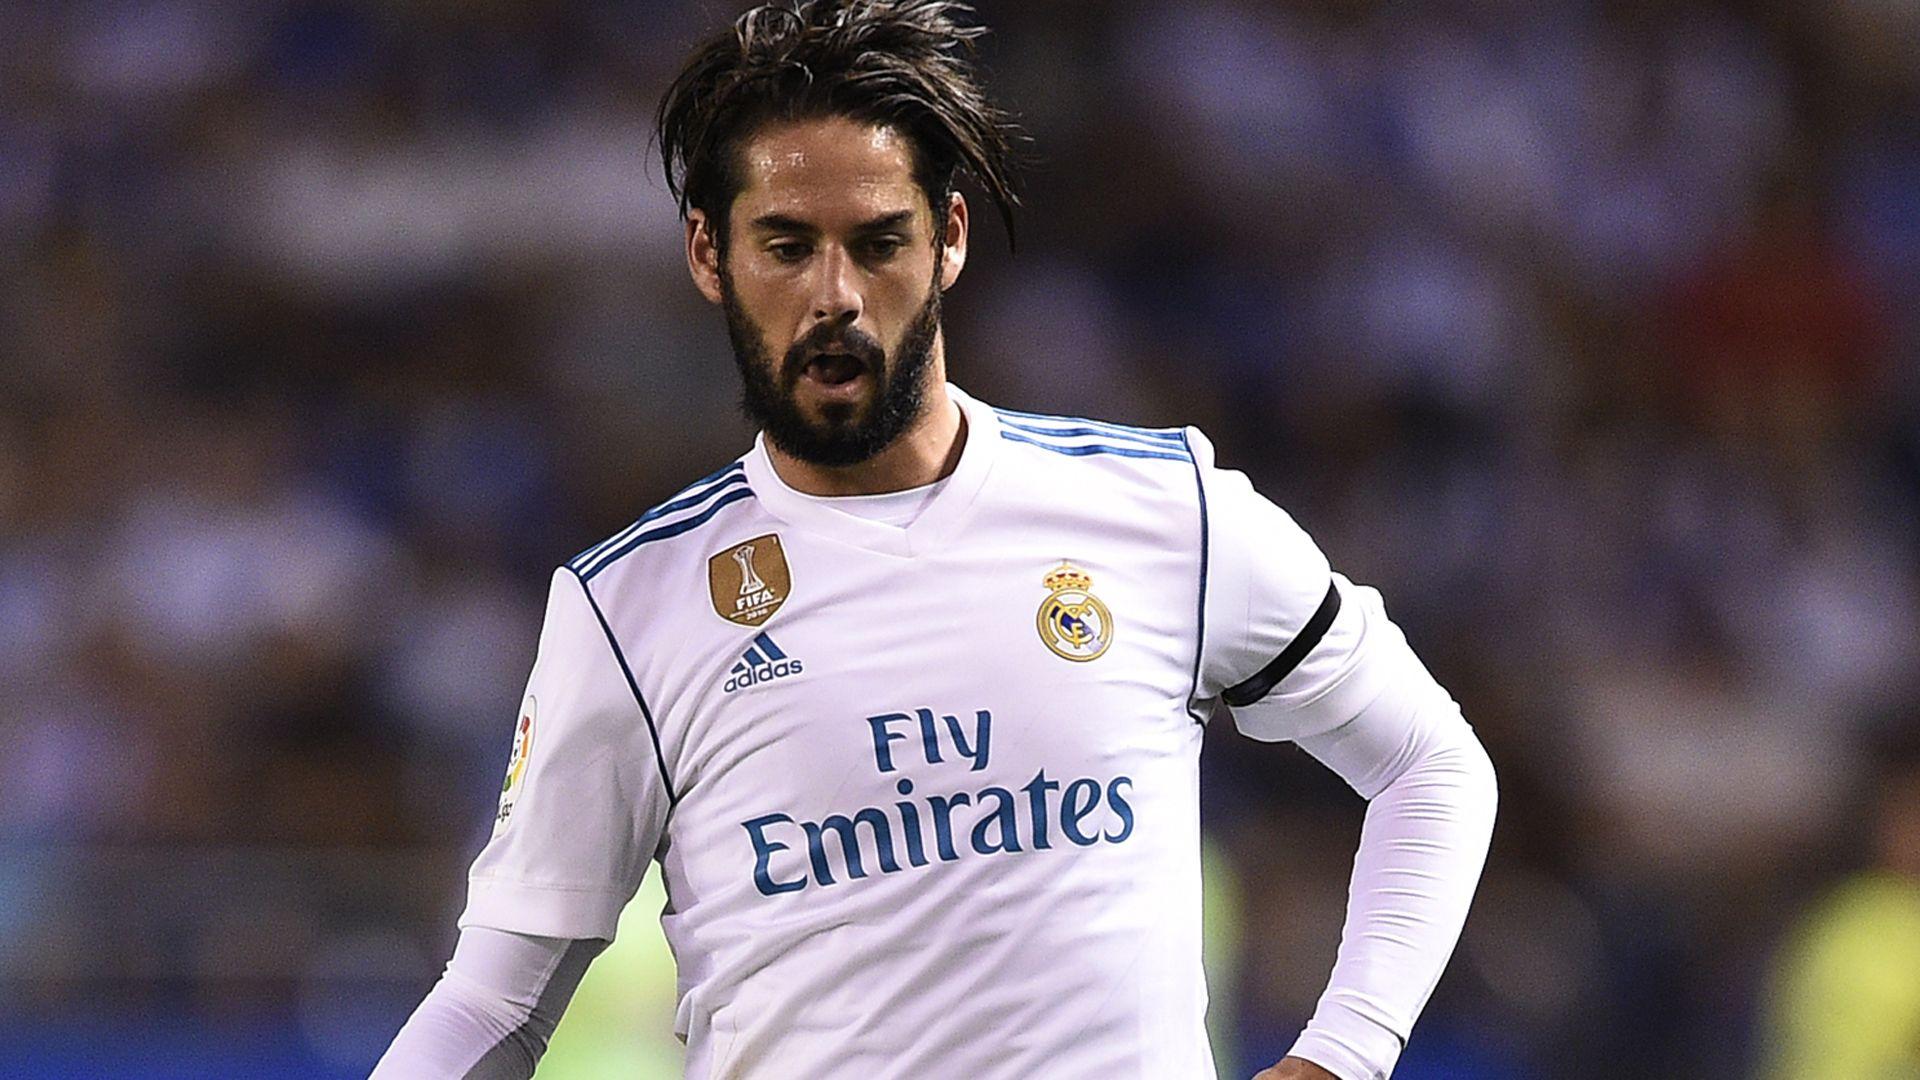 Isco renewal is a done deal